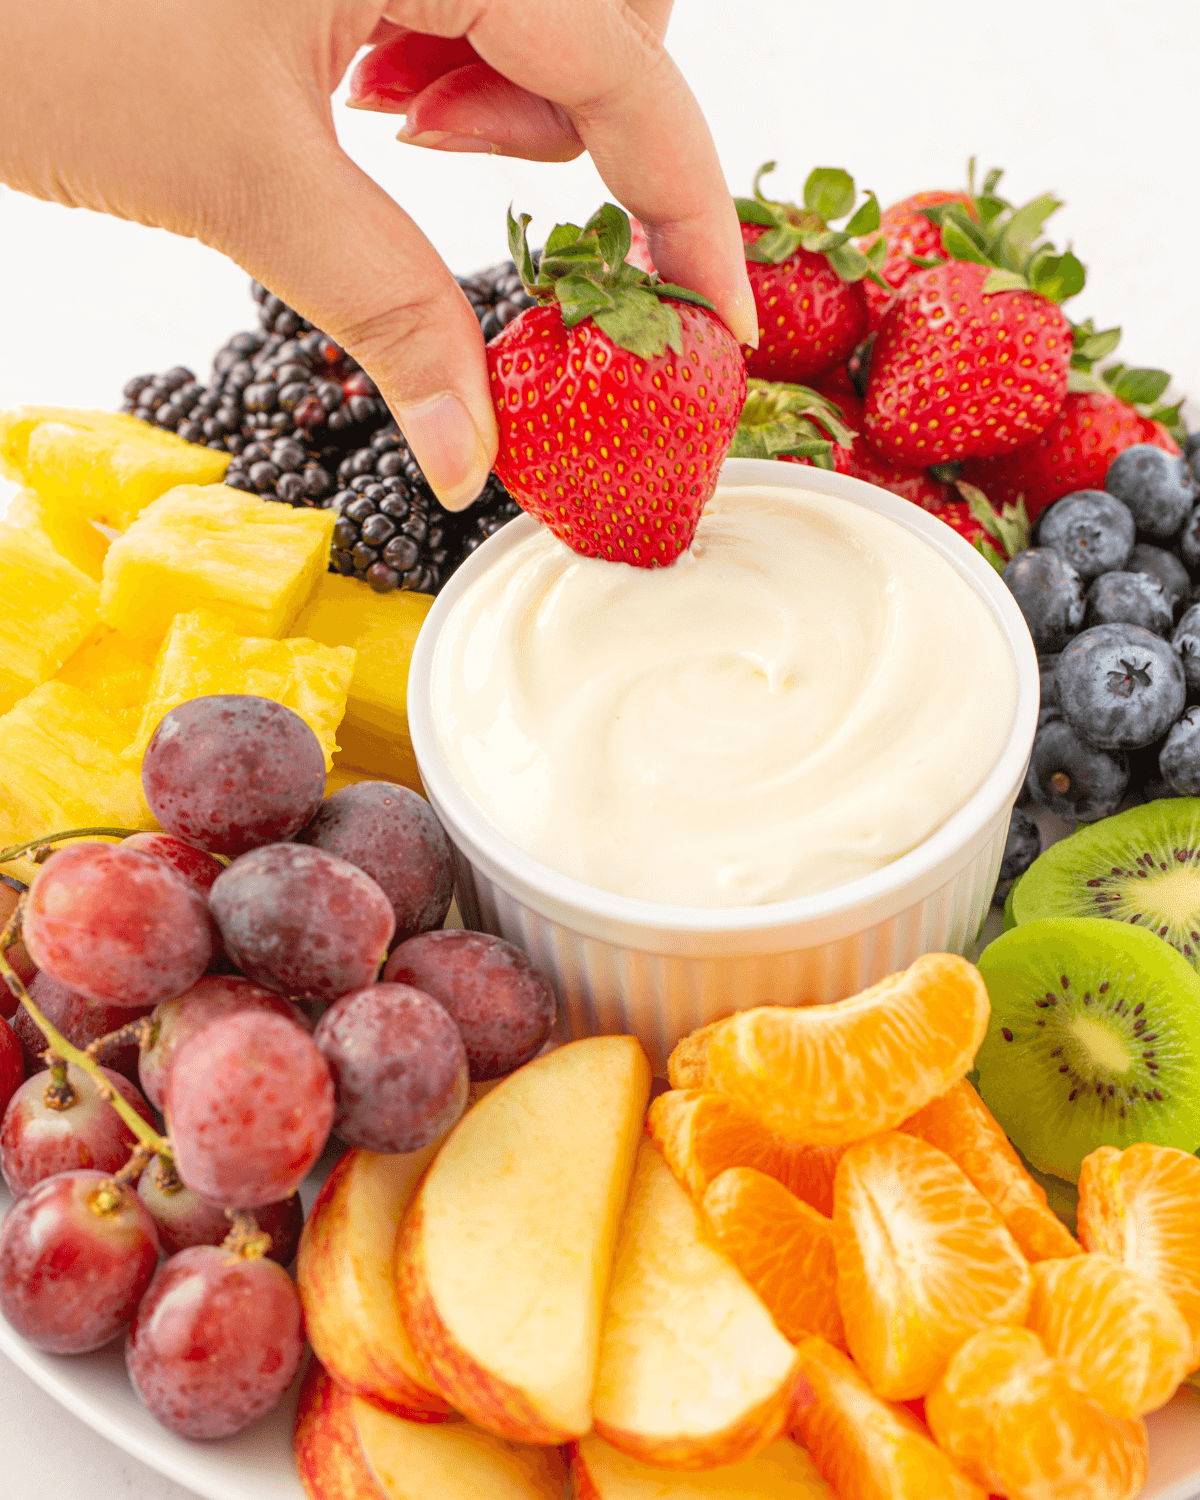 A hand dipping a strawberry into a bowl surrounded by an assortment of fresh fruits.